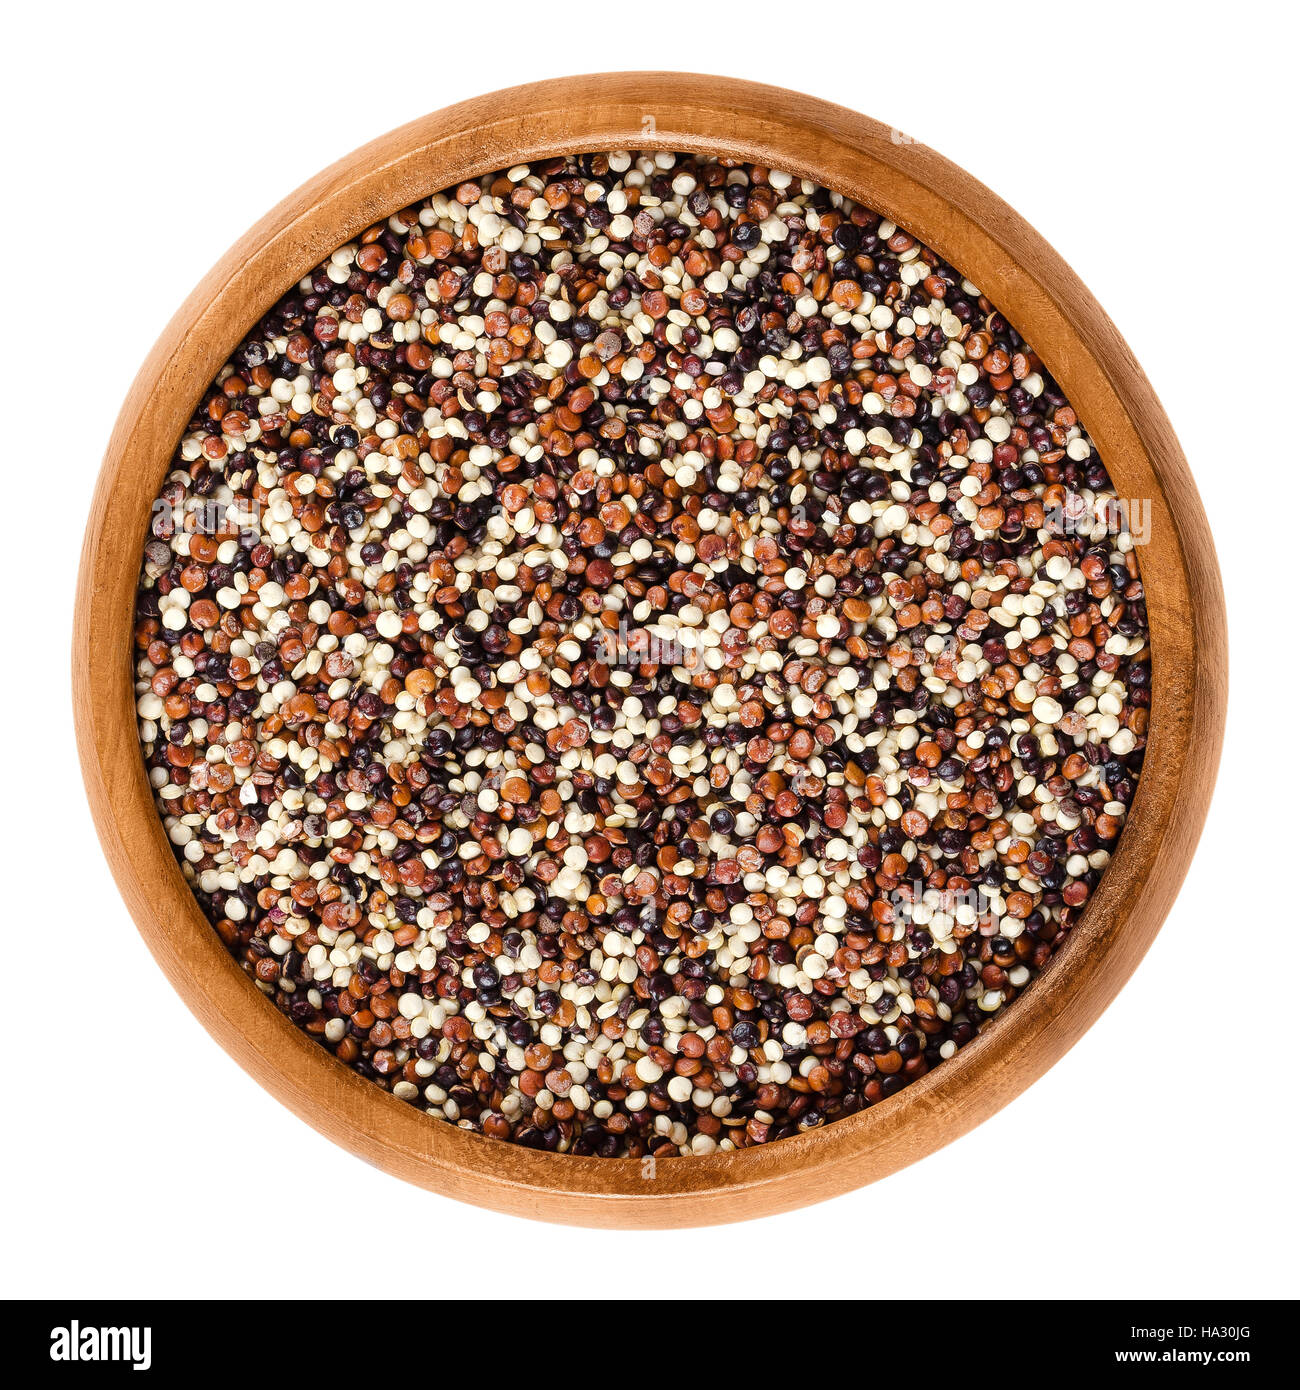 Mixed quinoa seeds in wooden bowl. Yellow, red and black edible fruits of grain crop Chenopodium quinoa in the Amaranth family. Stock Photo